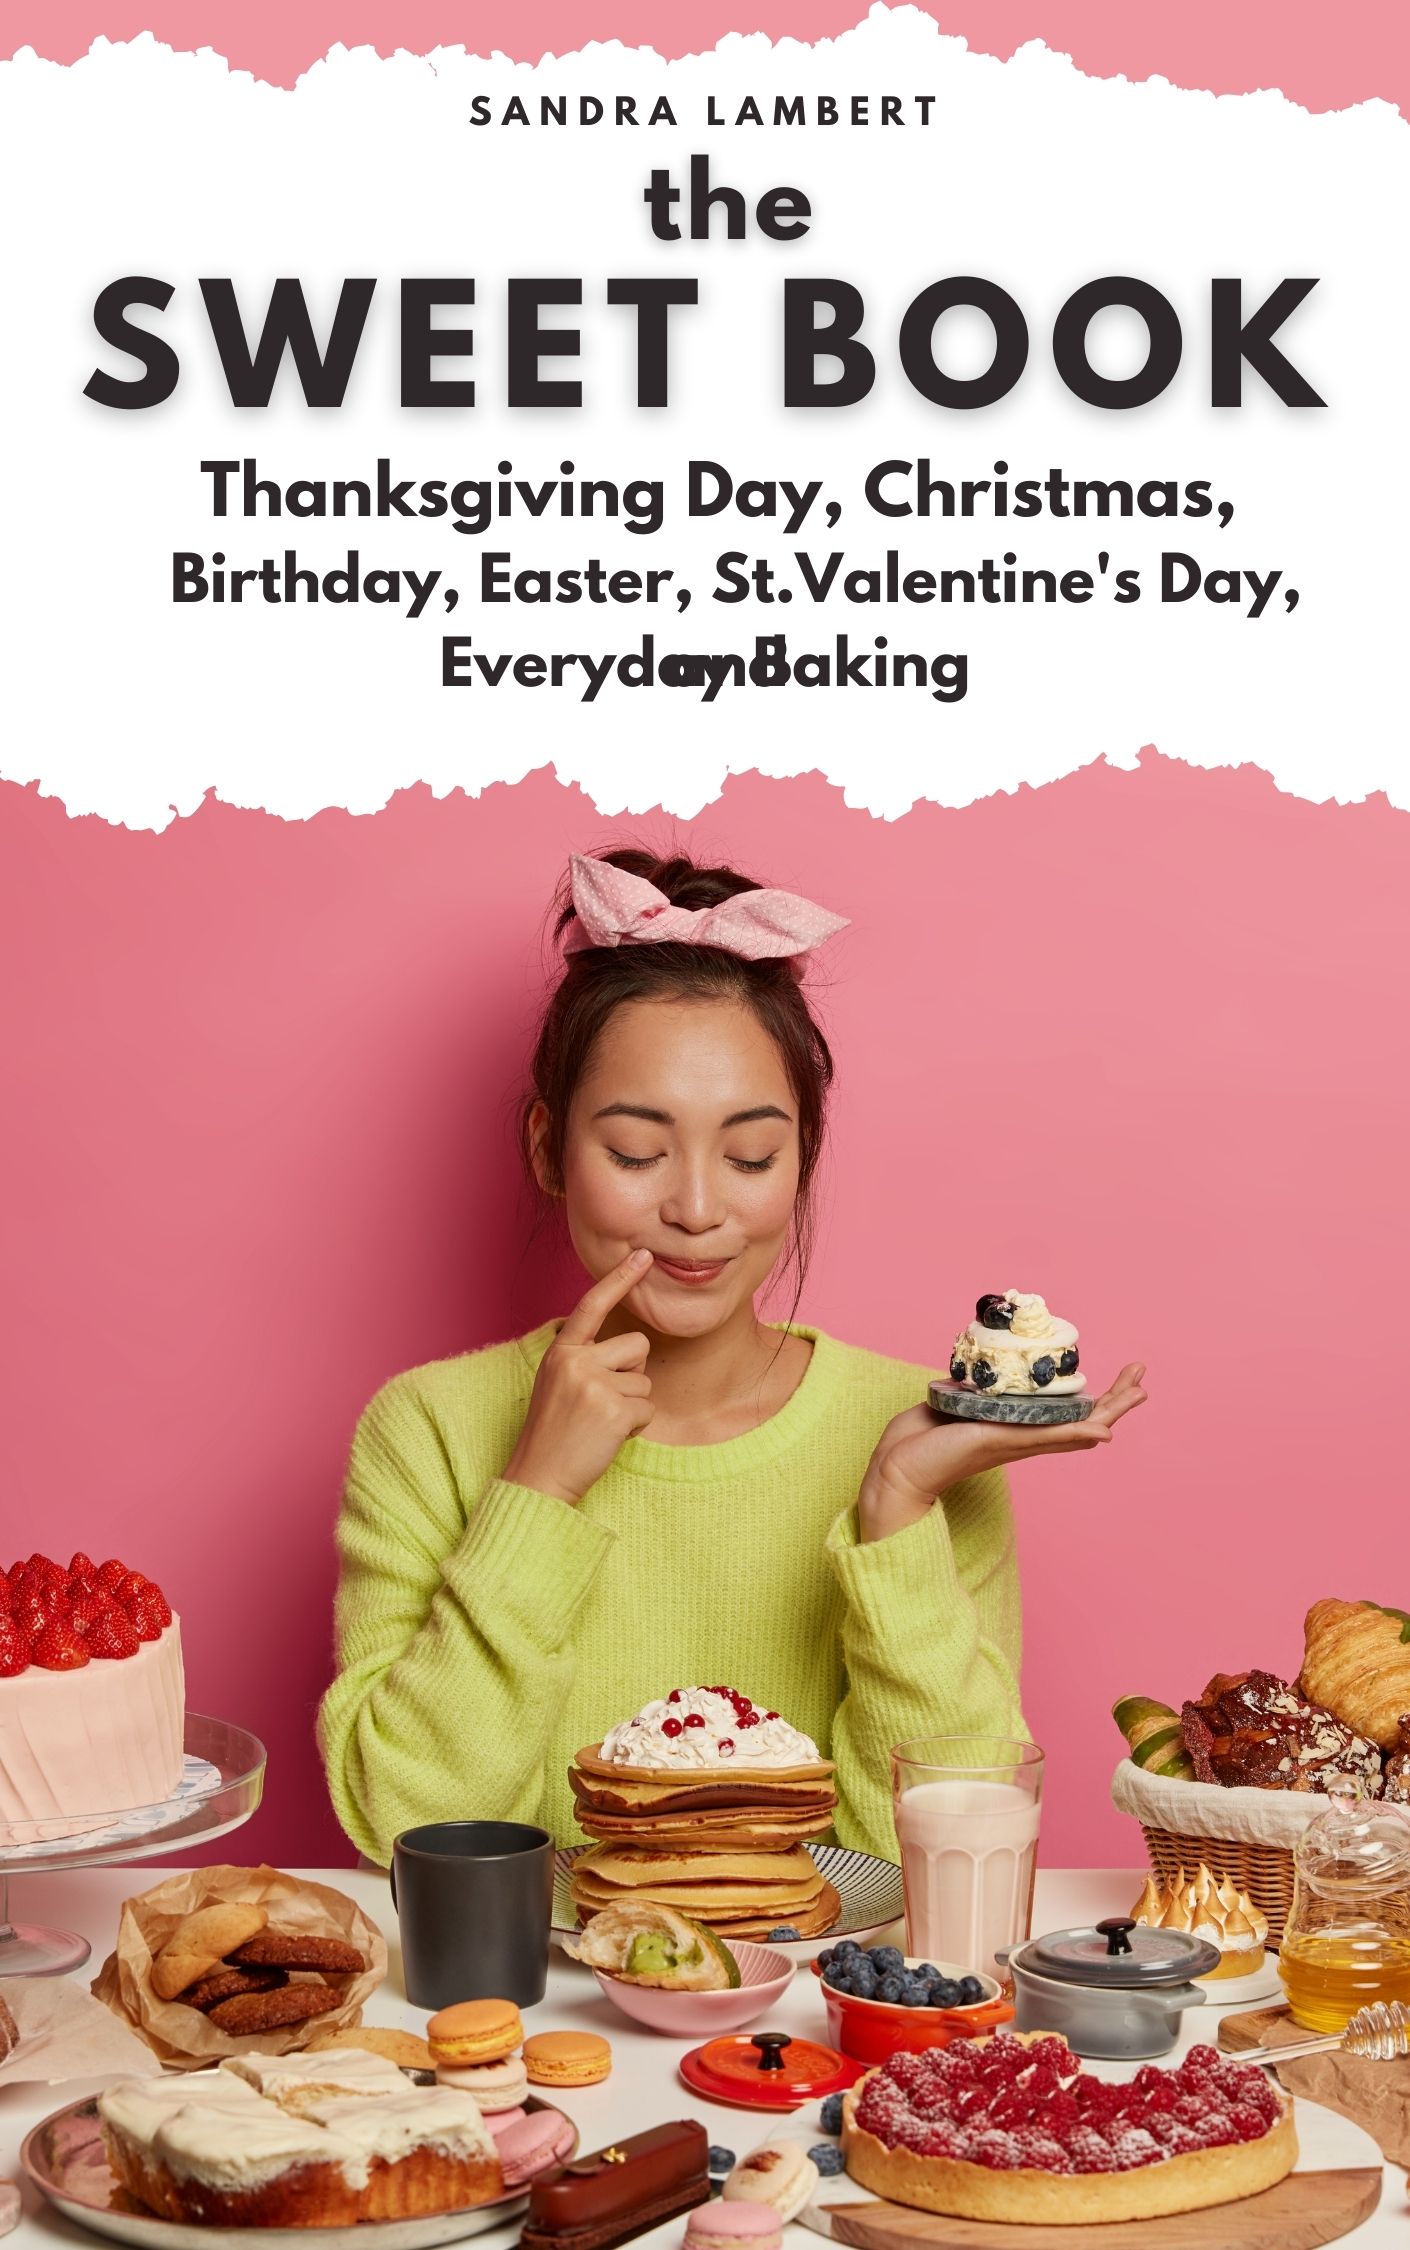 FREE: The SWEET BOOK : Thanksgiving Day, Christmas, Birthday, Easter, St. Valentines’ Day, and Everyday Baking by Sandra Lambert